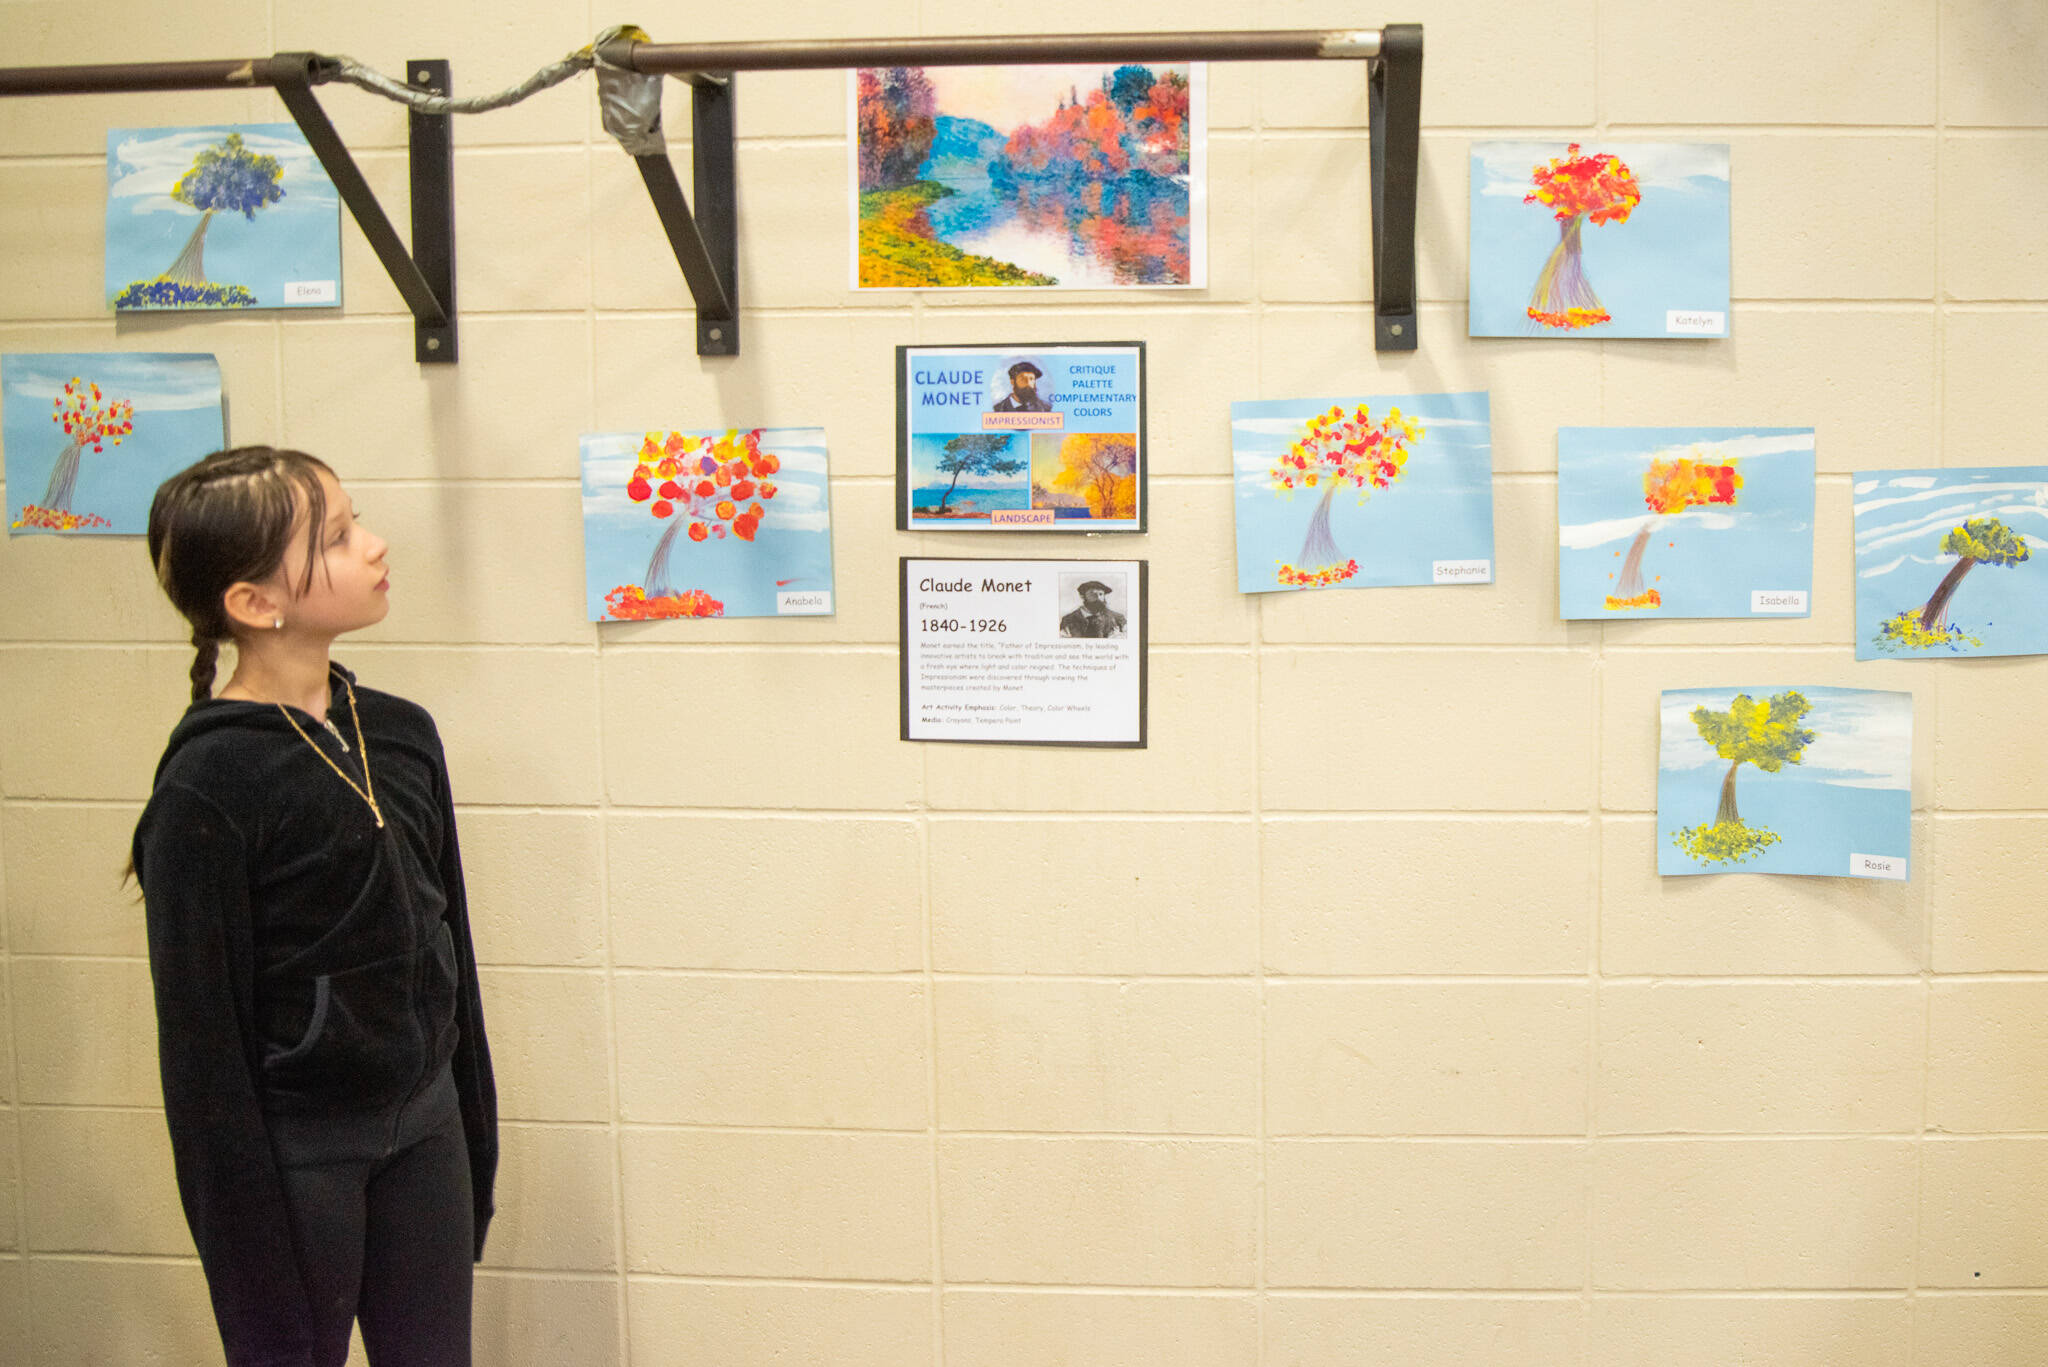 Sequim Gazette photo by Emily Matthiessen / Jayne Caulfield examines some of the artwork on display at Greywolf’s “Meet the Masters” art class exhibition on Tuesday. These pieces were made by 4th and 5th grade children after studying the impressionism and landscapes of Monet.